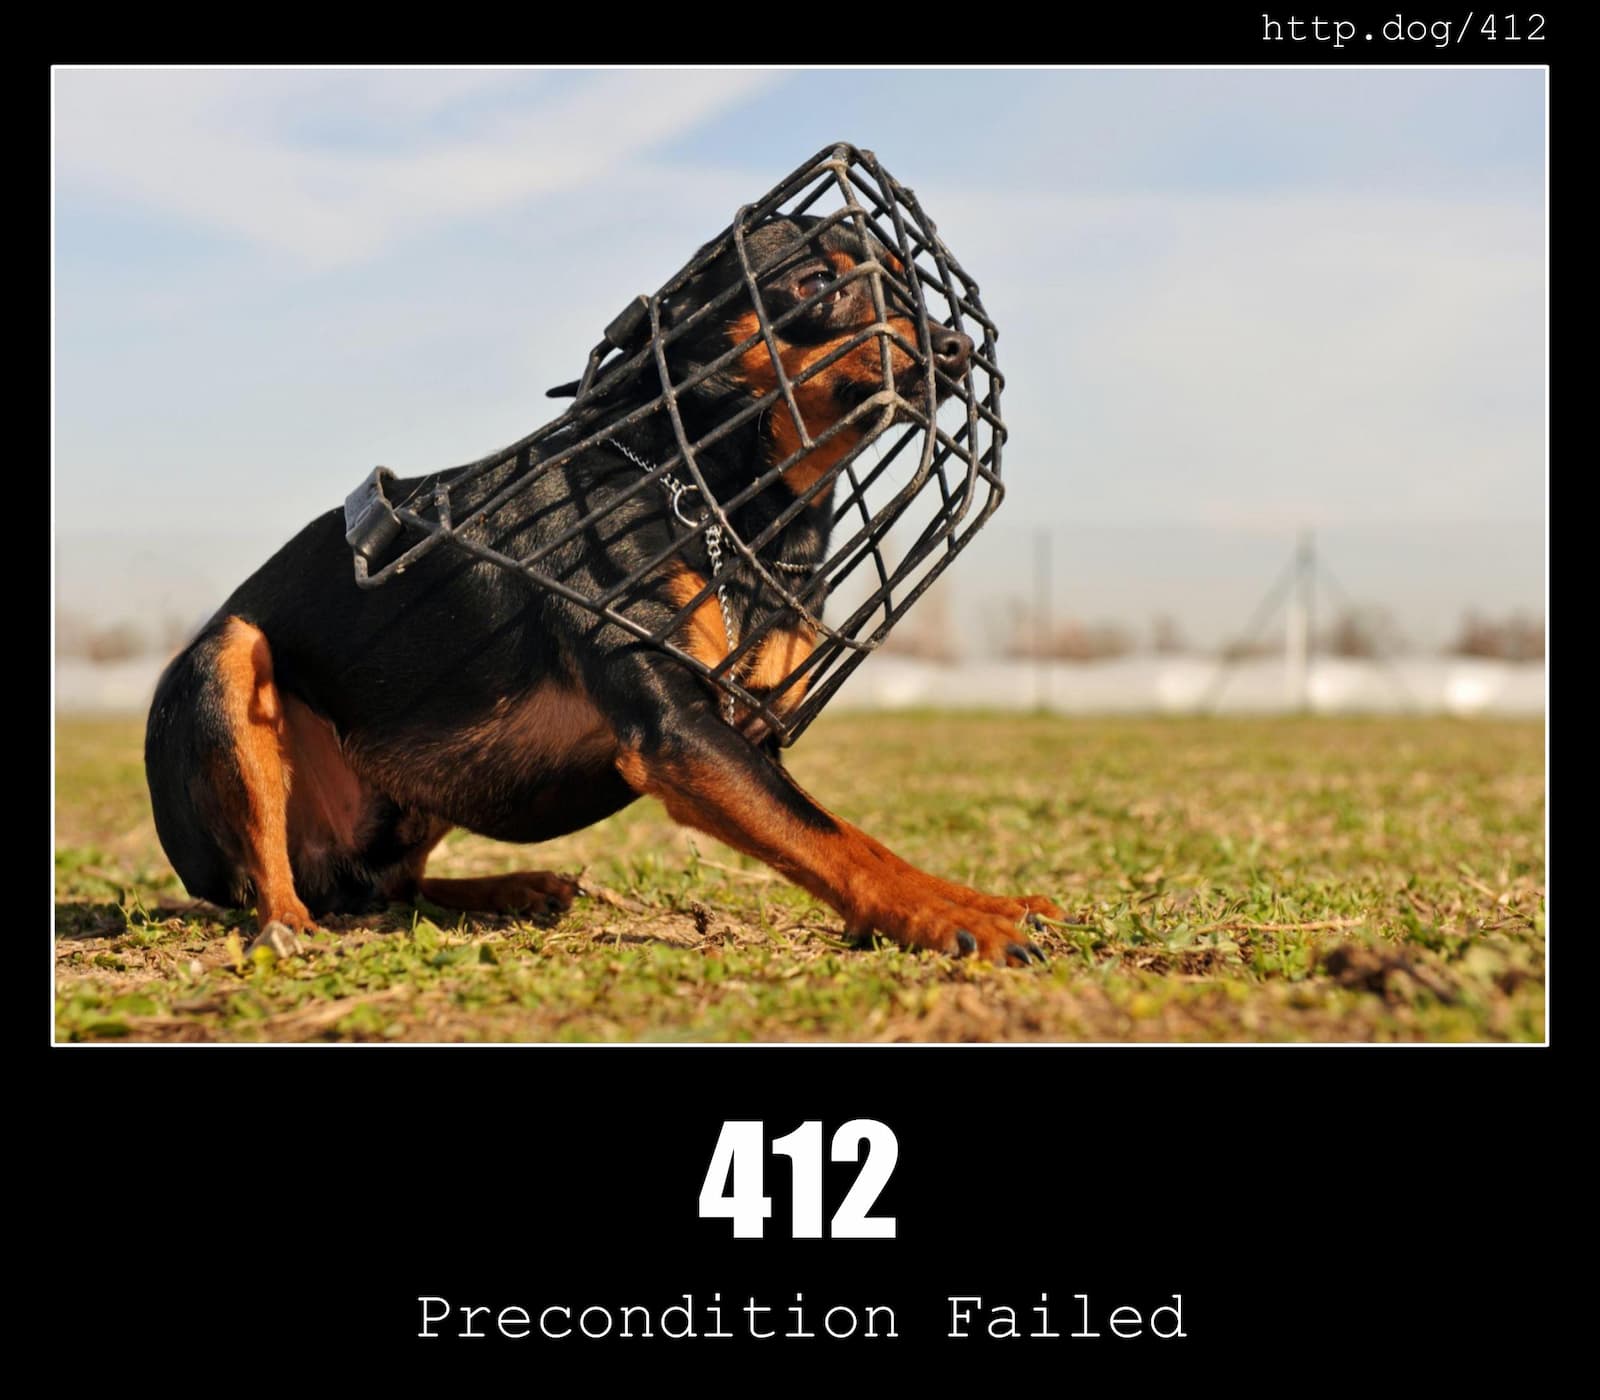 HTTP Status Code 412 Precondition Failed & Dogs